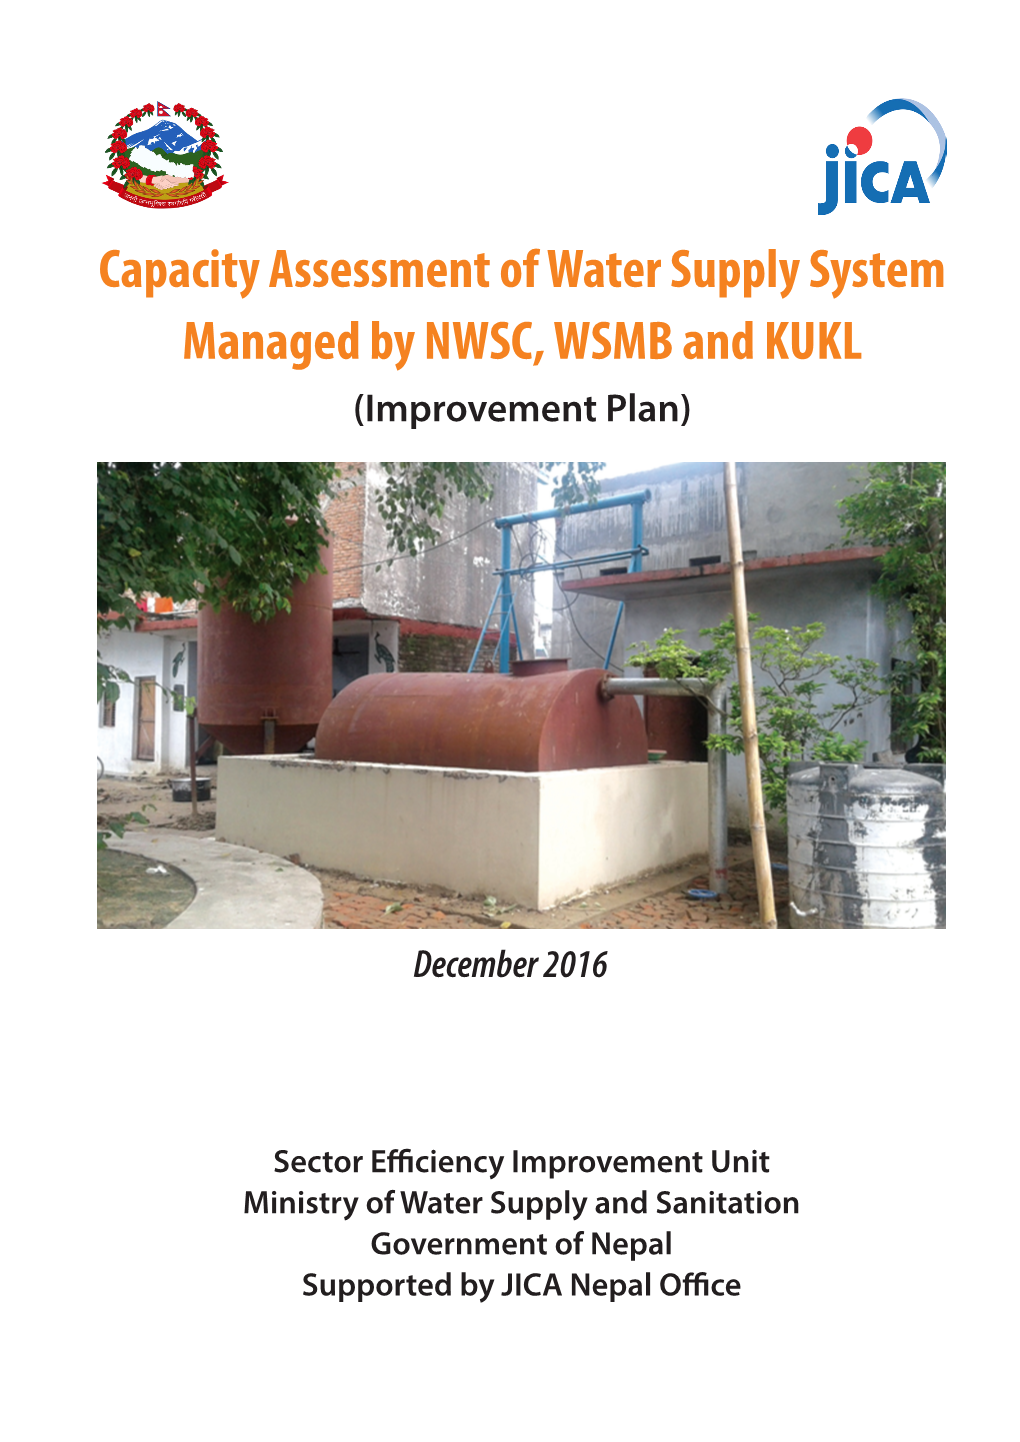 Capacity Assessment of Water Supply System Managed by NWSC, WSMB and KUKL (Improvement Plan)